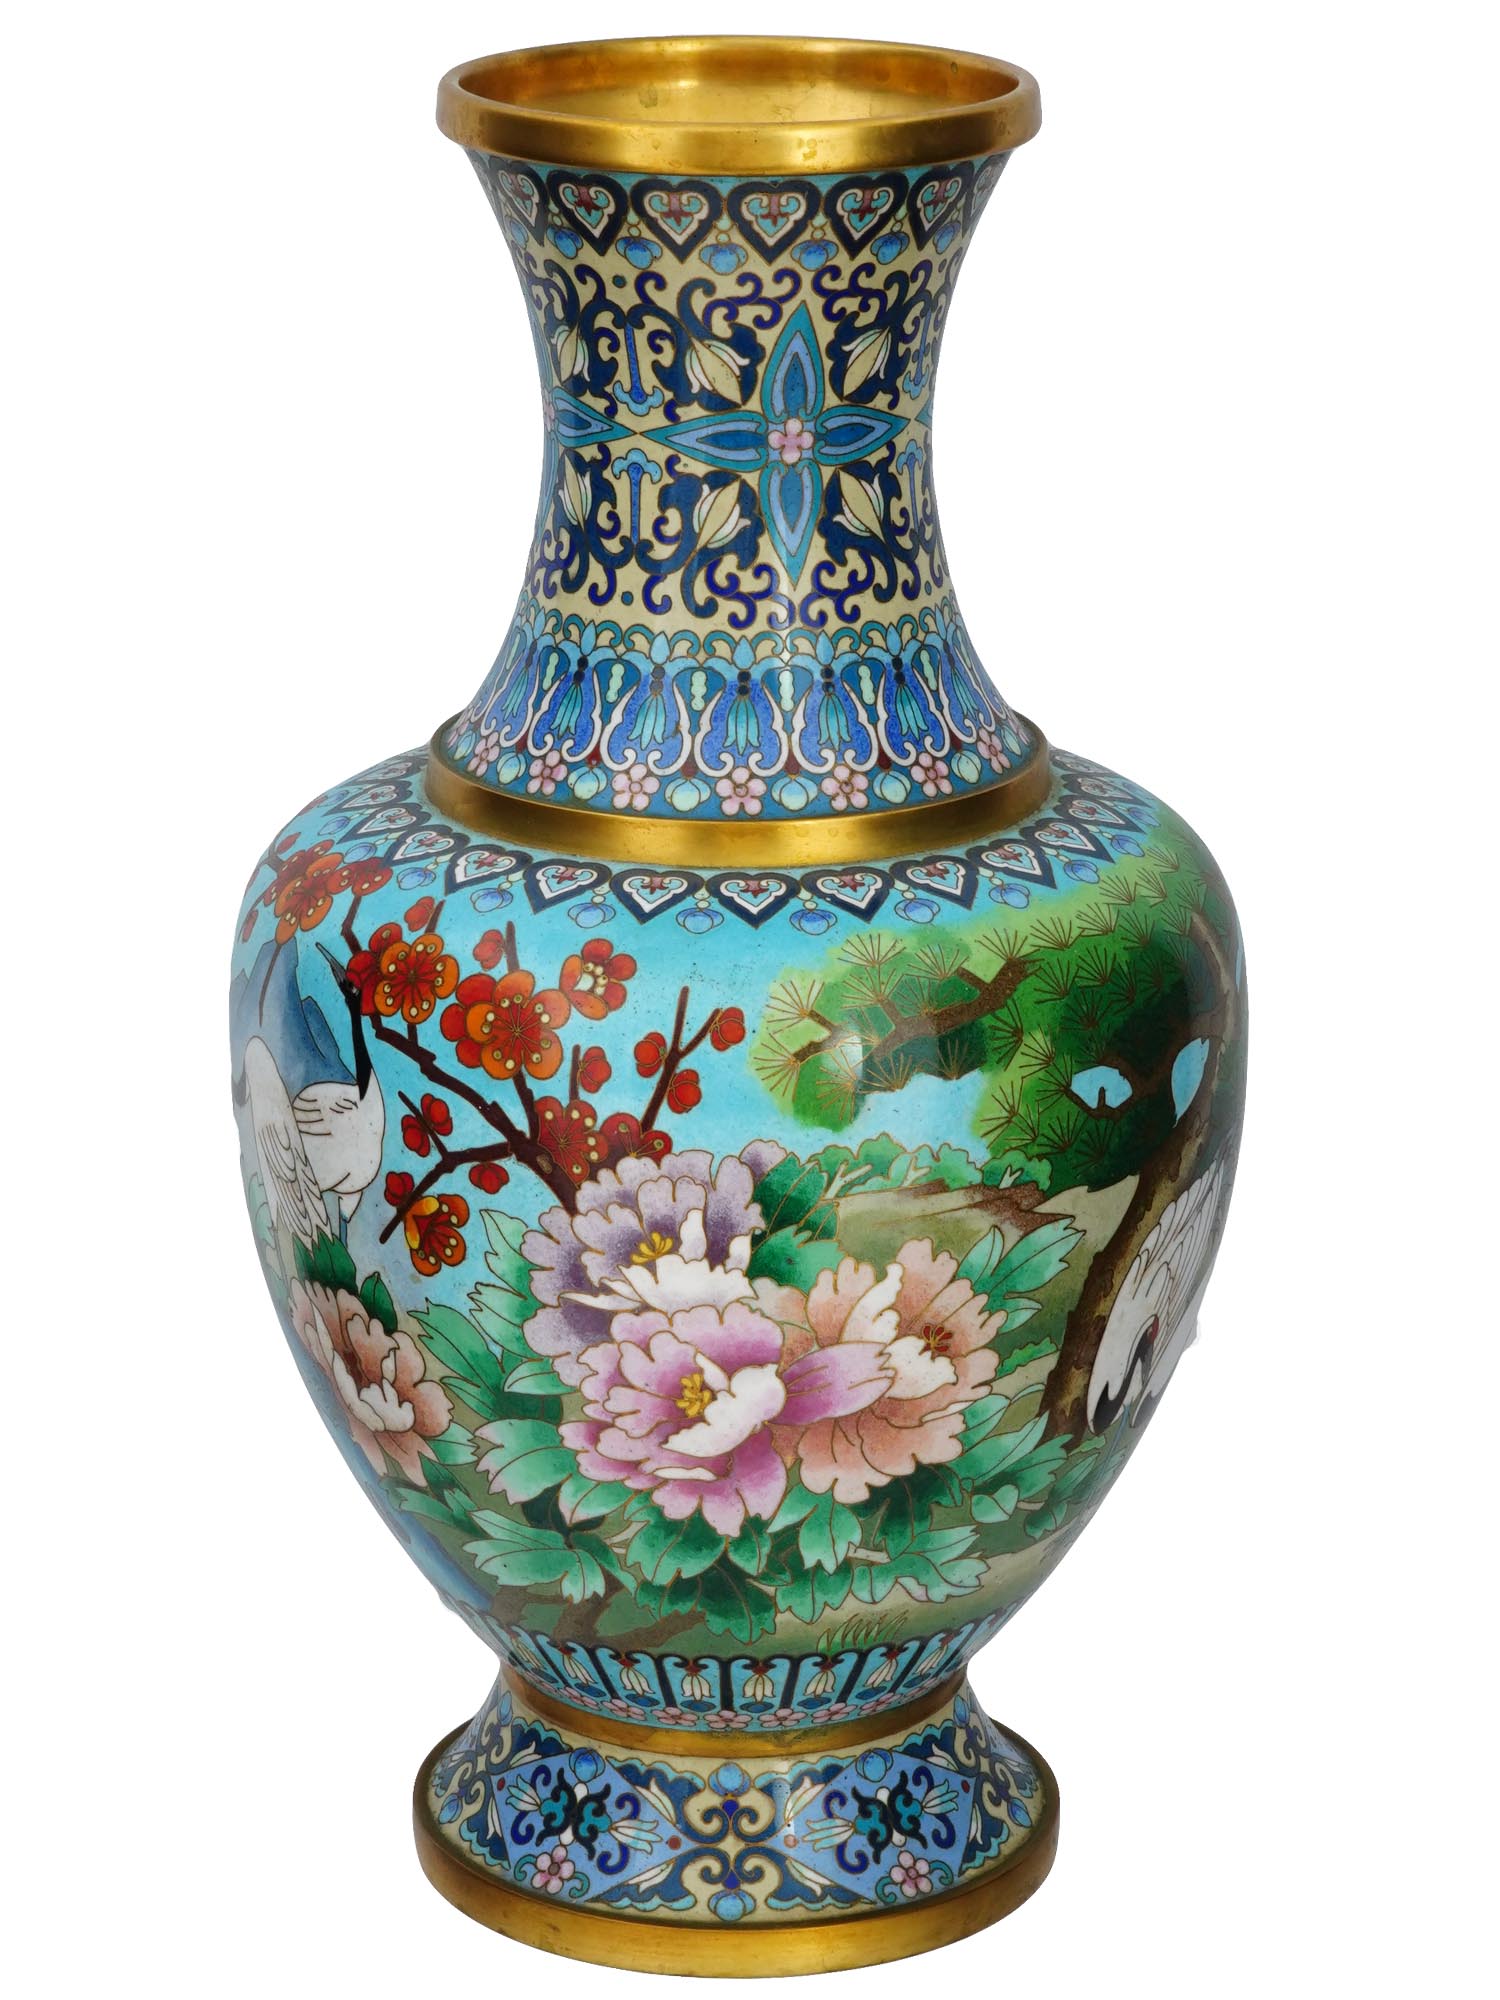 ANTIQUE CHINESE QING CLOISONNE ENAMEL VASE WITH BIRDS PIC-2